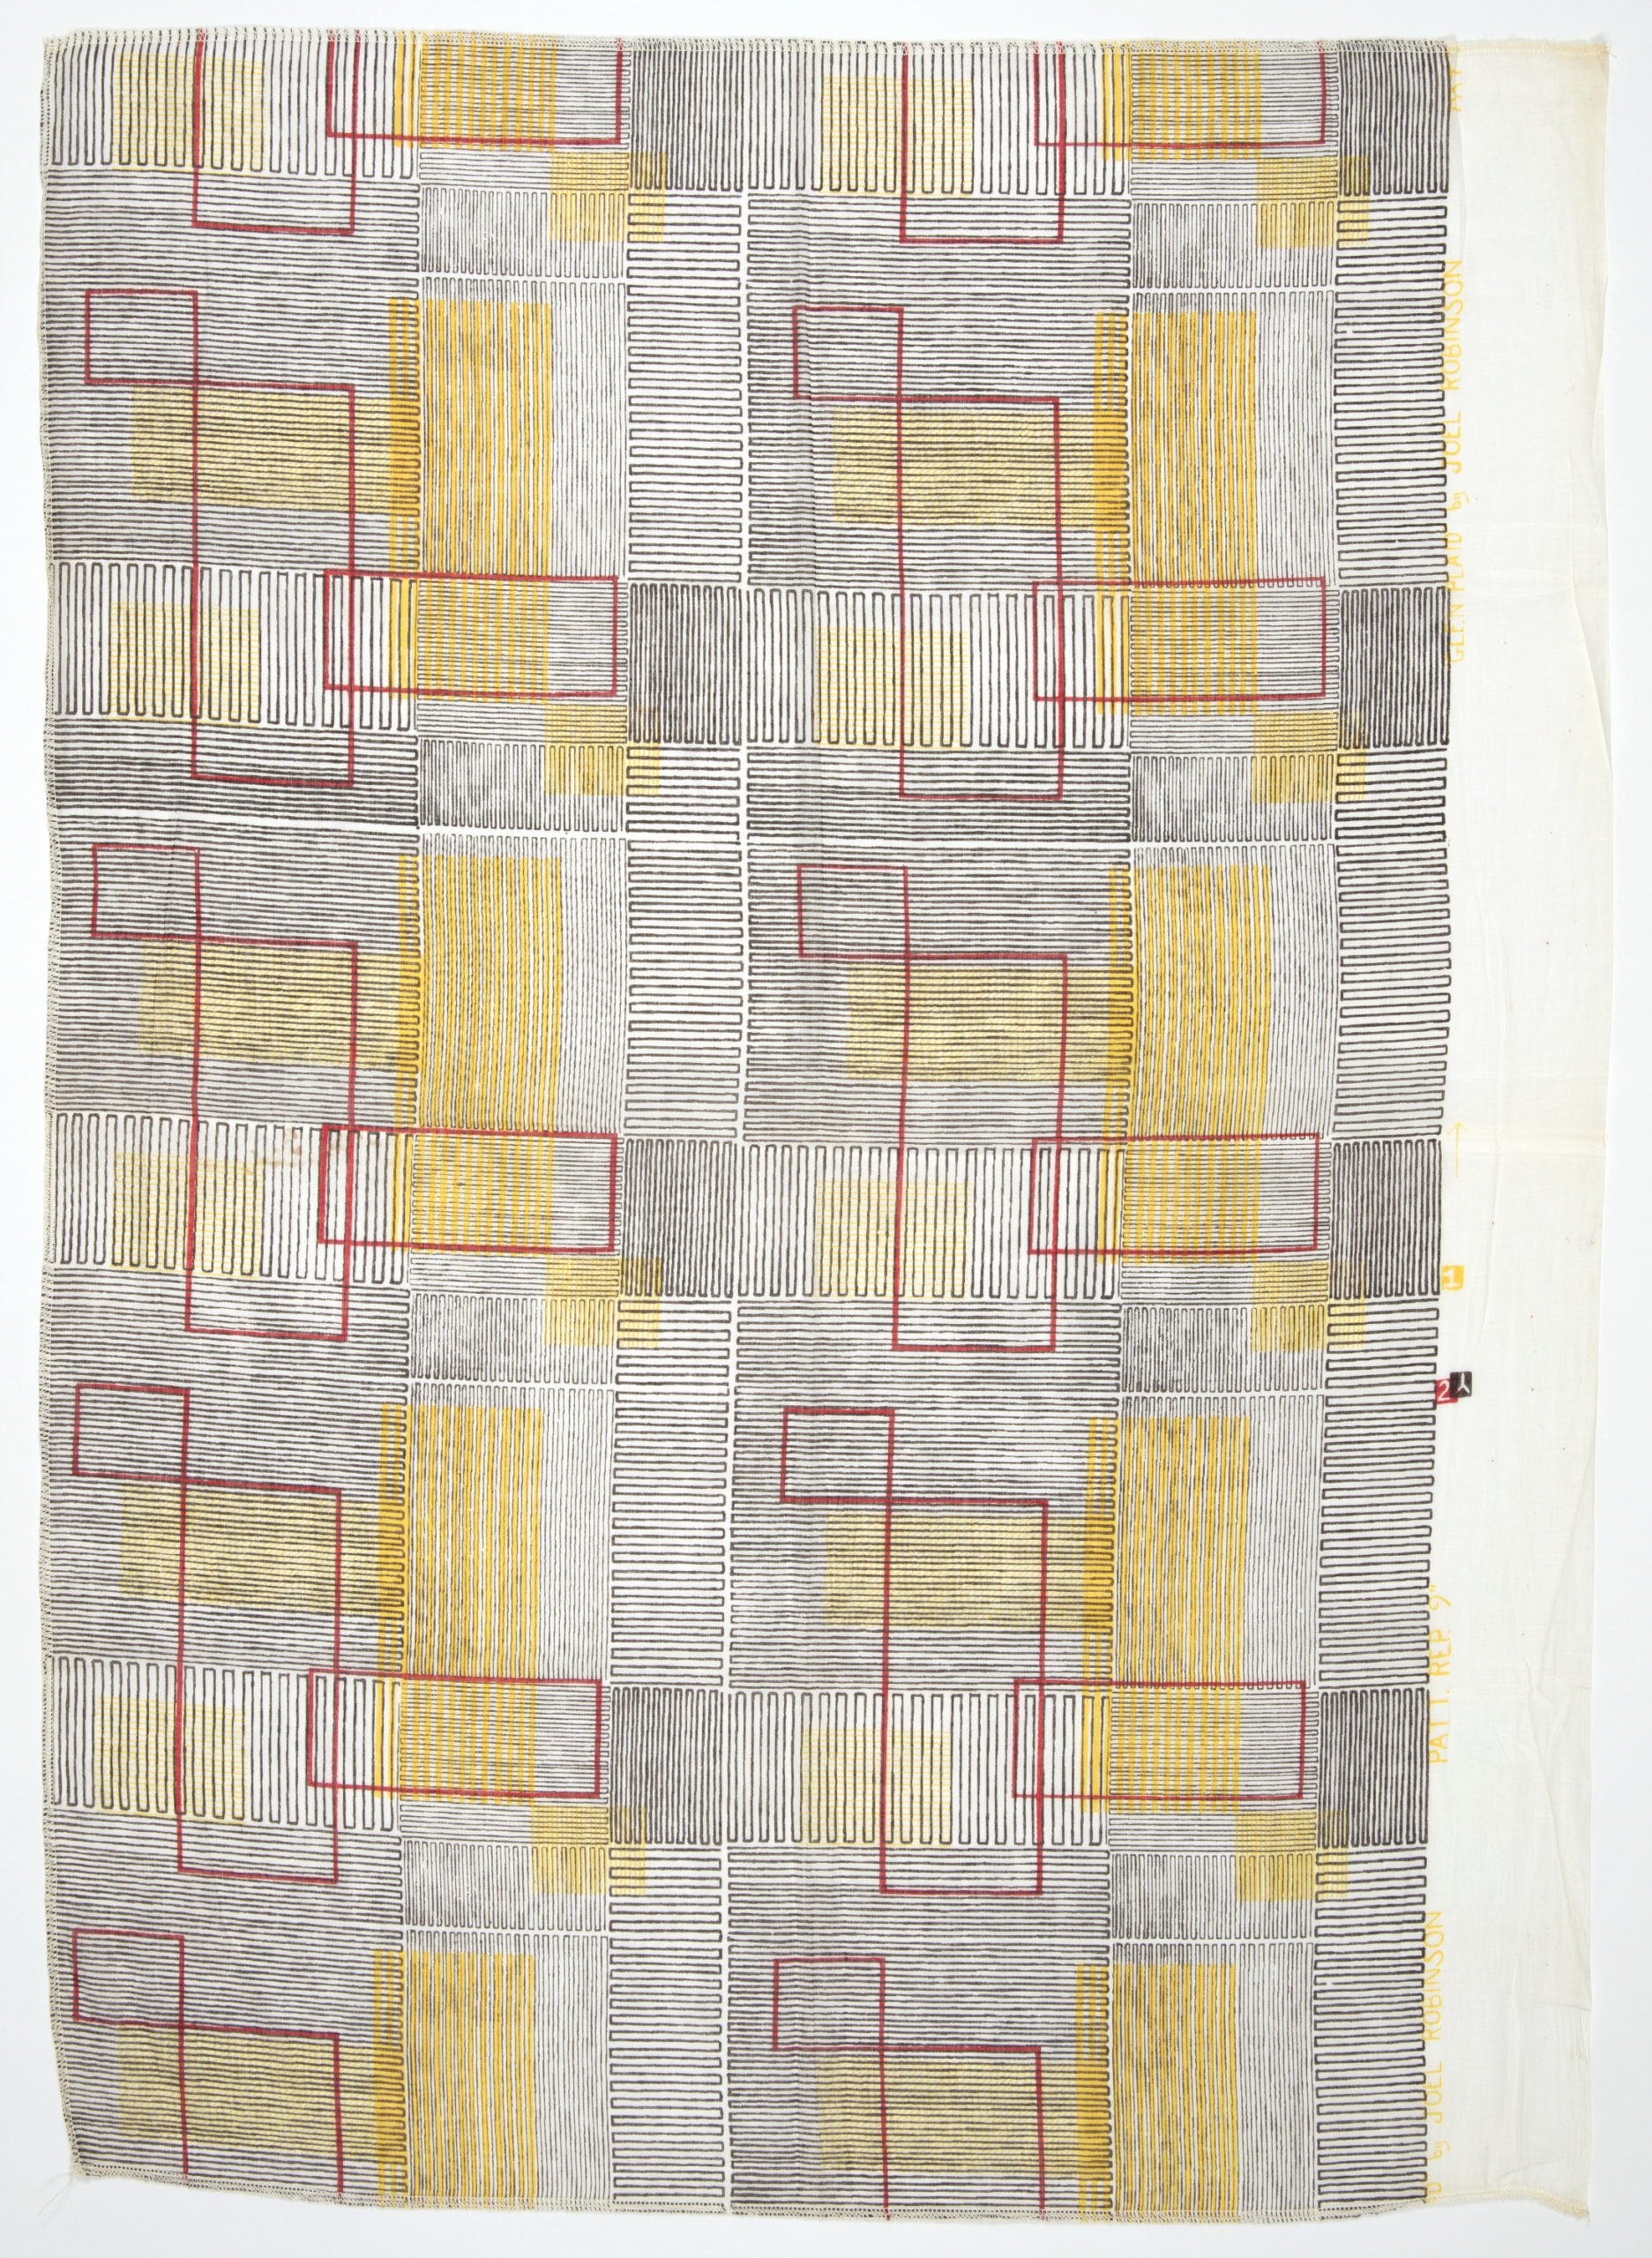 Image features: Dense configuration of dark brown lines has overlapping yellow and red lines creating rectangular groupings on a white ground. Please scroll down to read the blog post about this object.